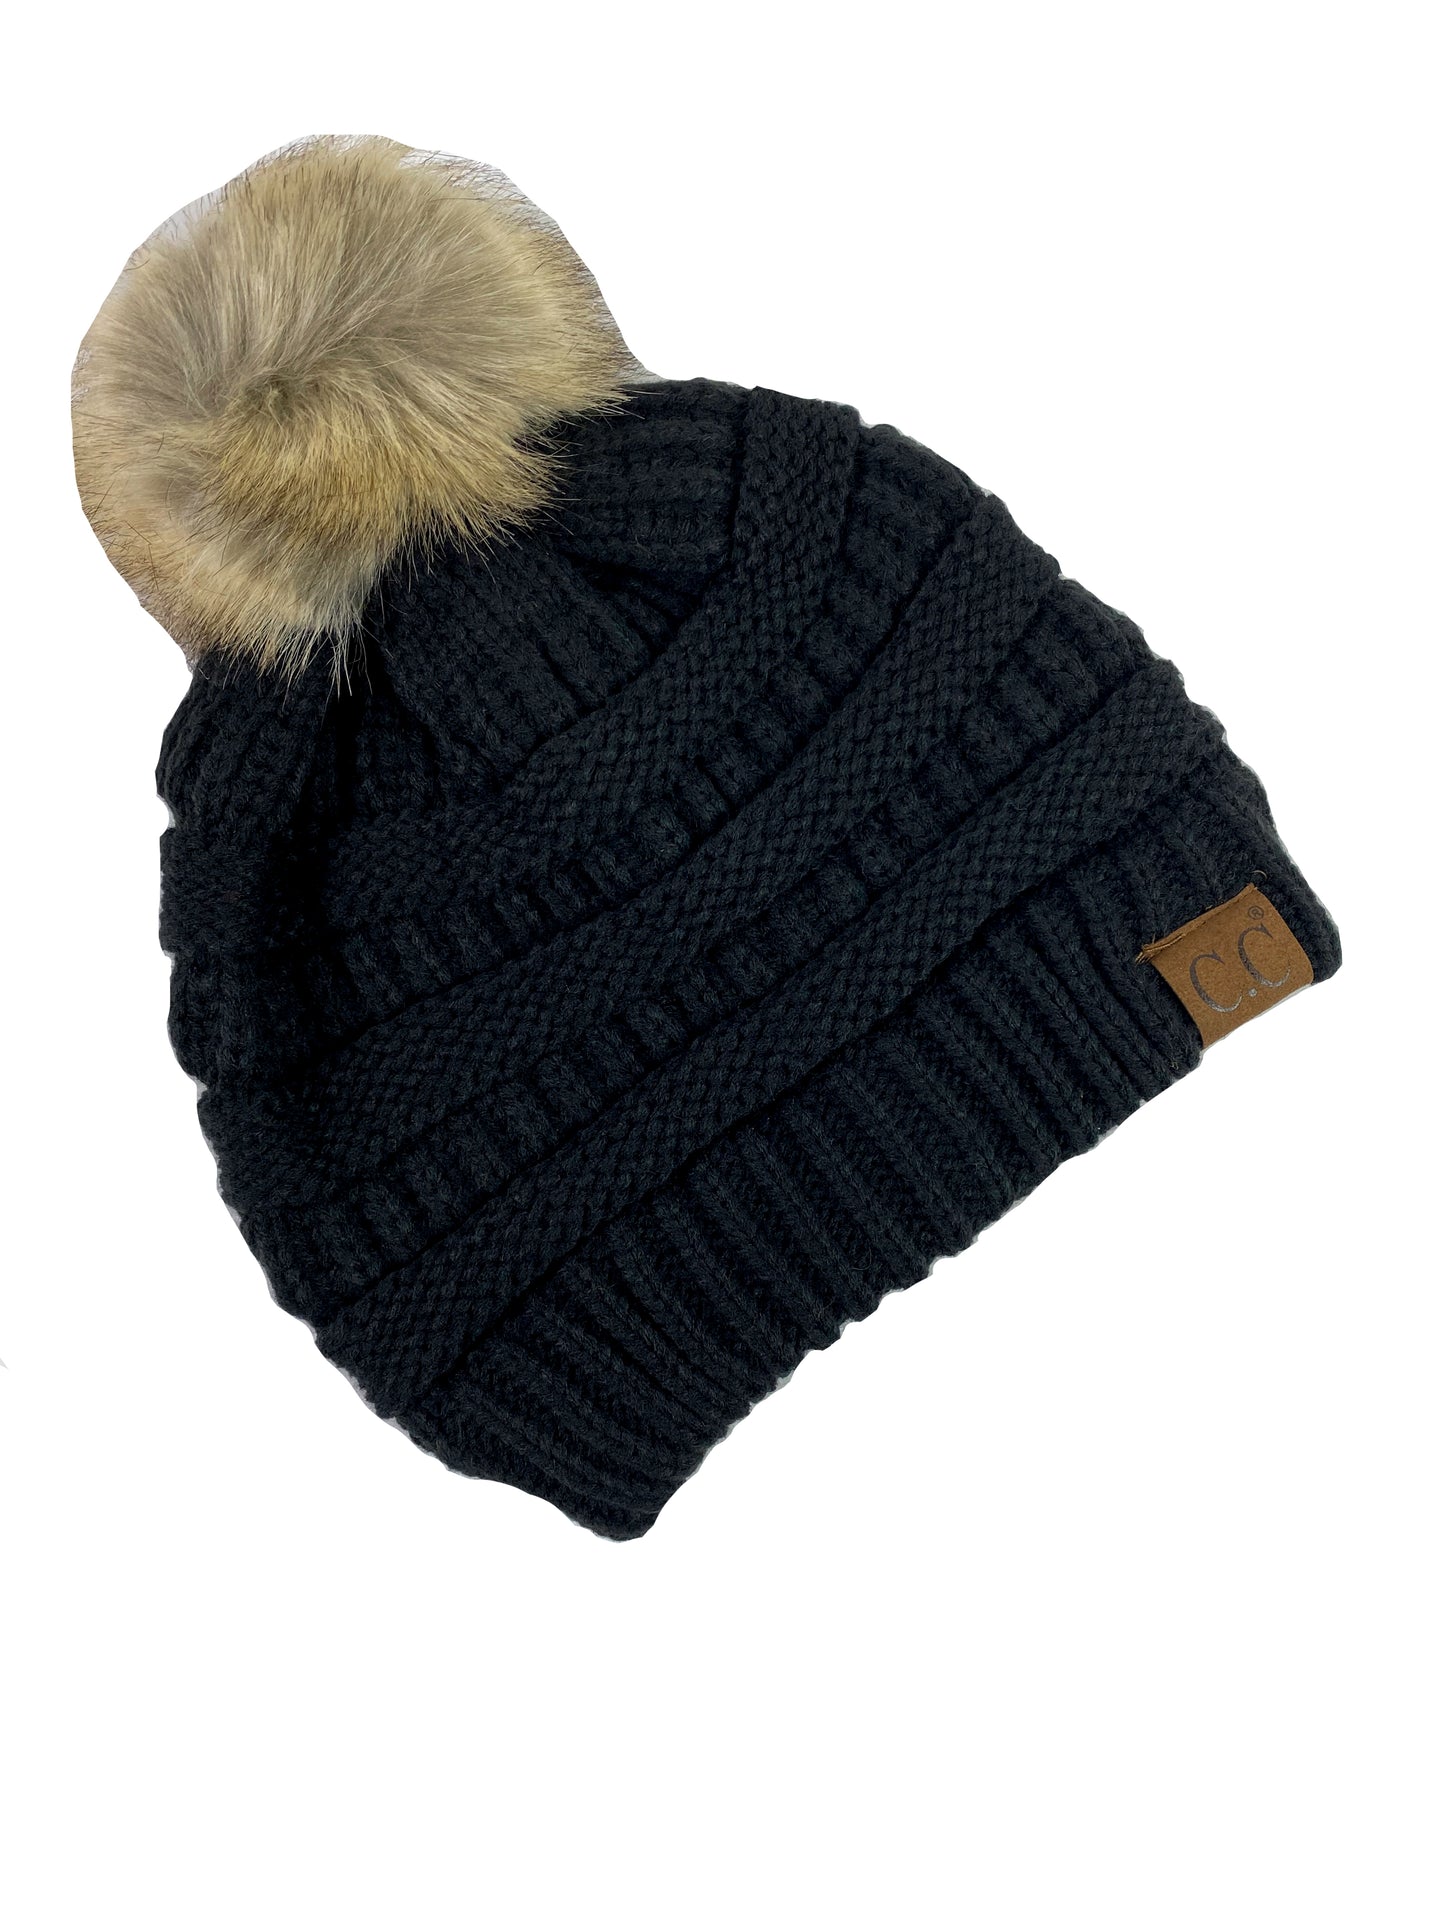 C.C Classic Beanies for Adults, Winter Hats, Winter Beanies, Premium Hats, Warm Hats, Winter Accessories, CC Beanies. One size fits all. Authentic C.C Hat 100% Acrylic. Faux Fur Pom-Pom